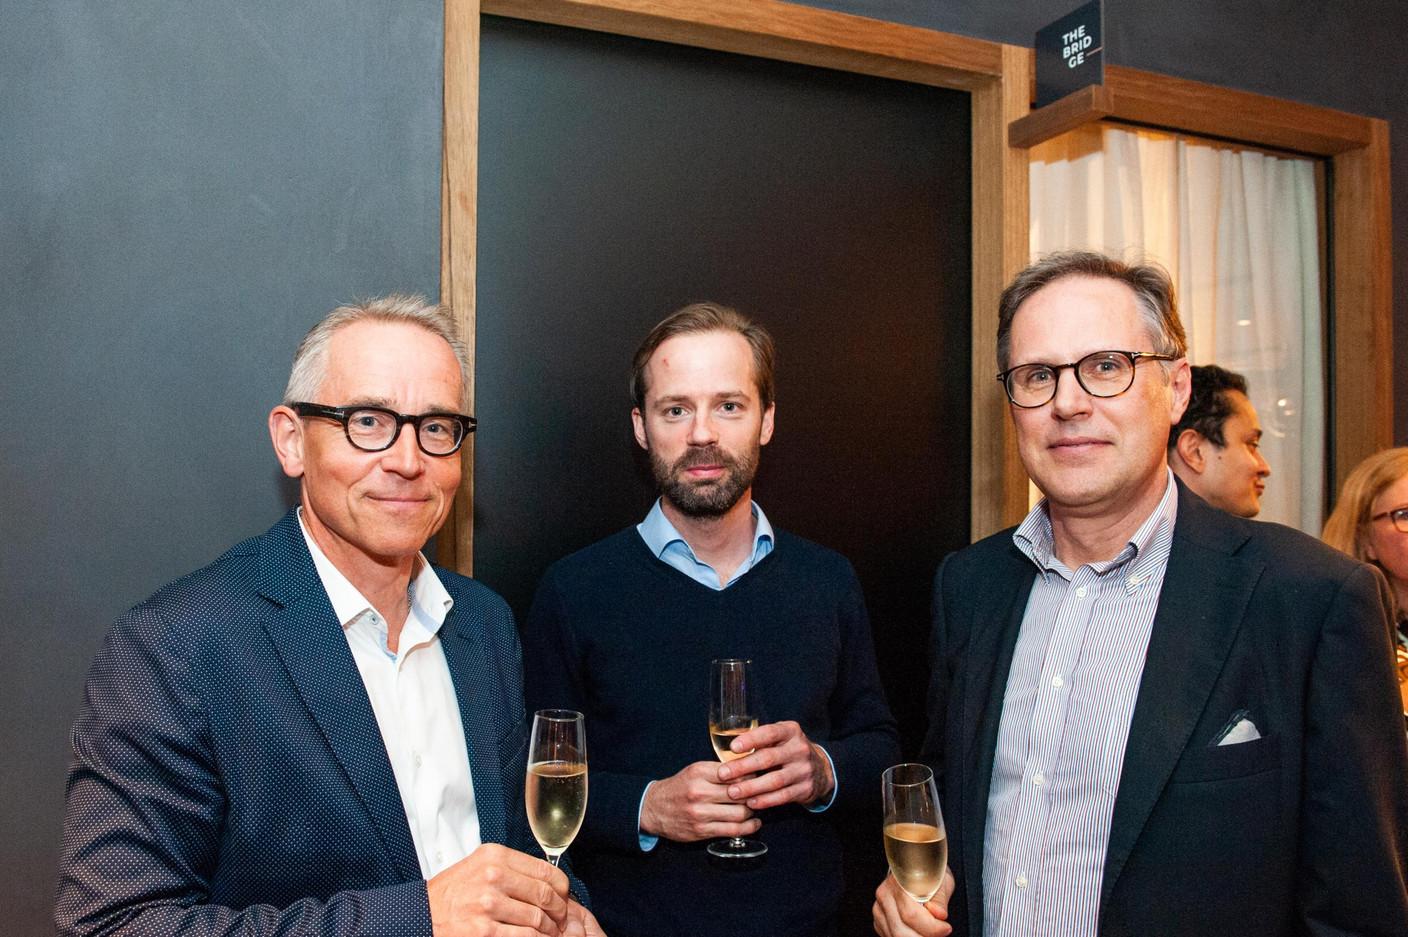 Jörgen Persson (Dunross & Co), Andreas Nabseth (Dunross & Co), Per Linder (Dunross & Co) (Photo: Lala La Photo)